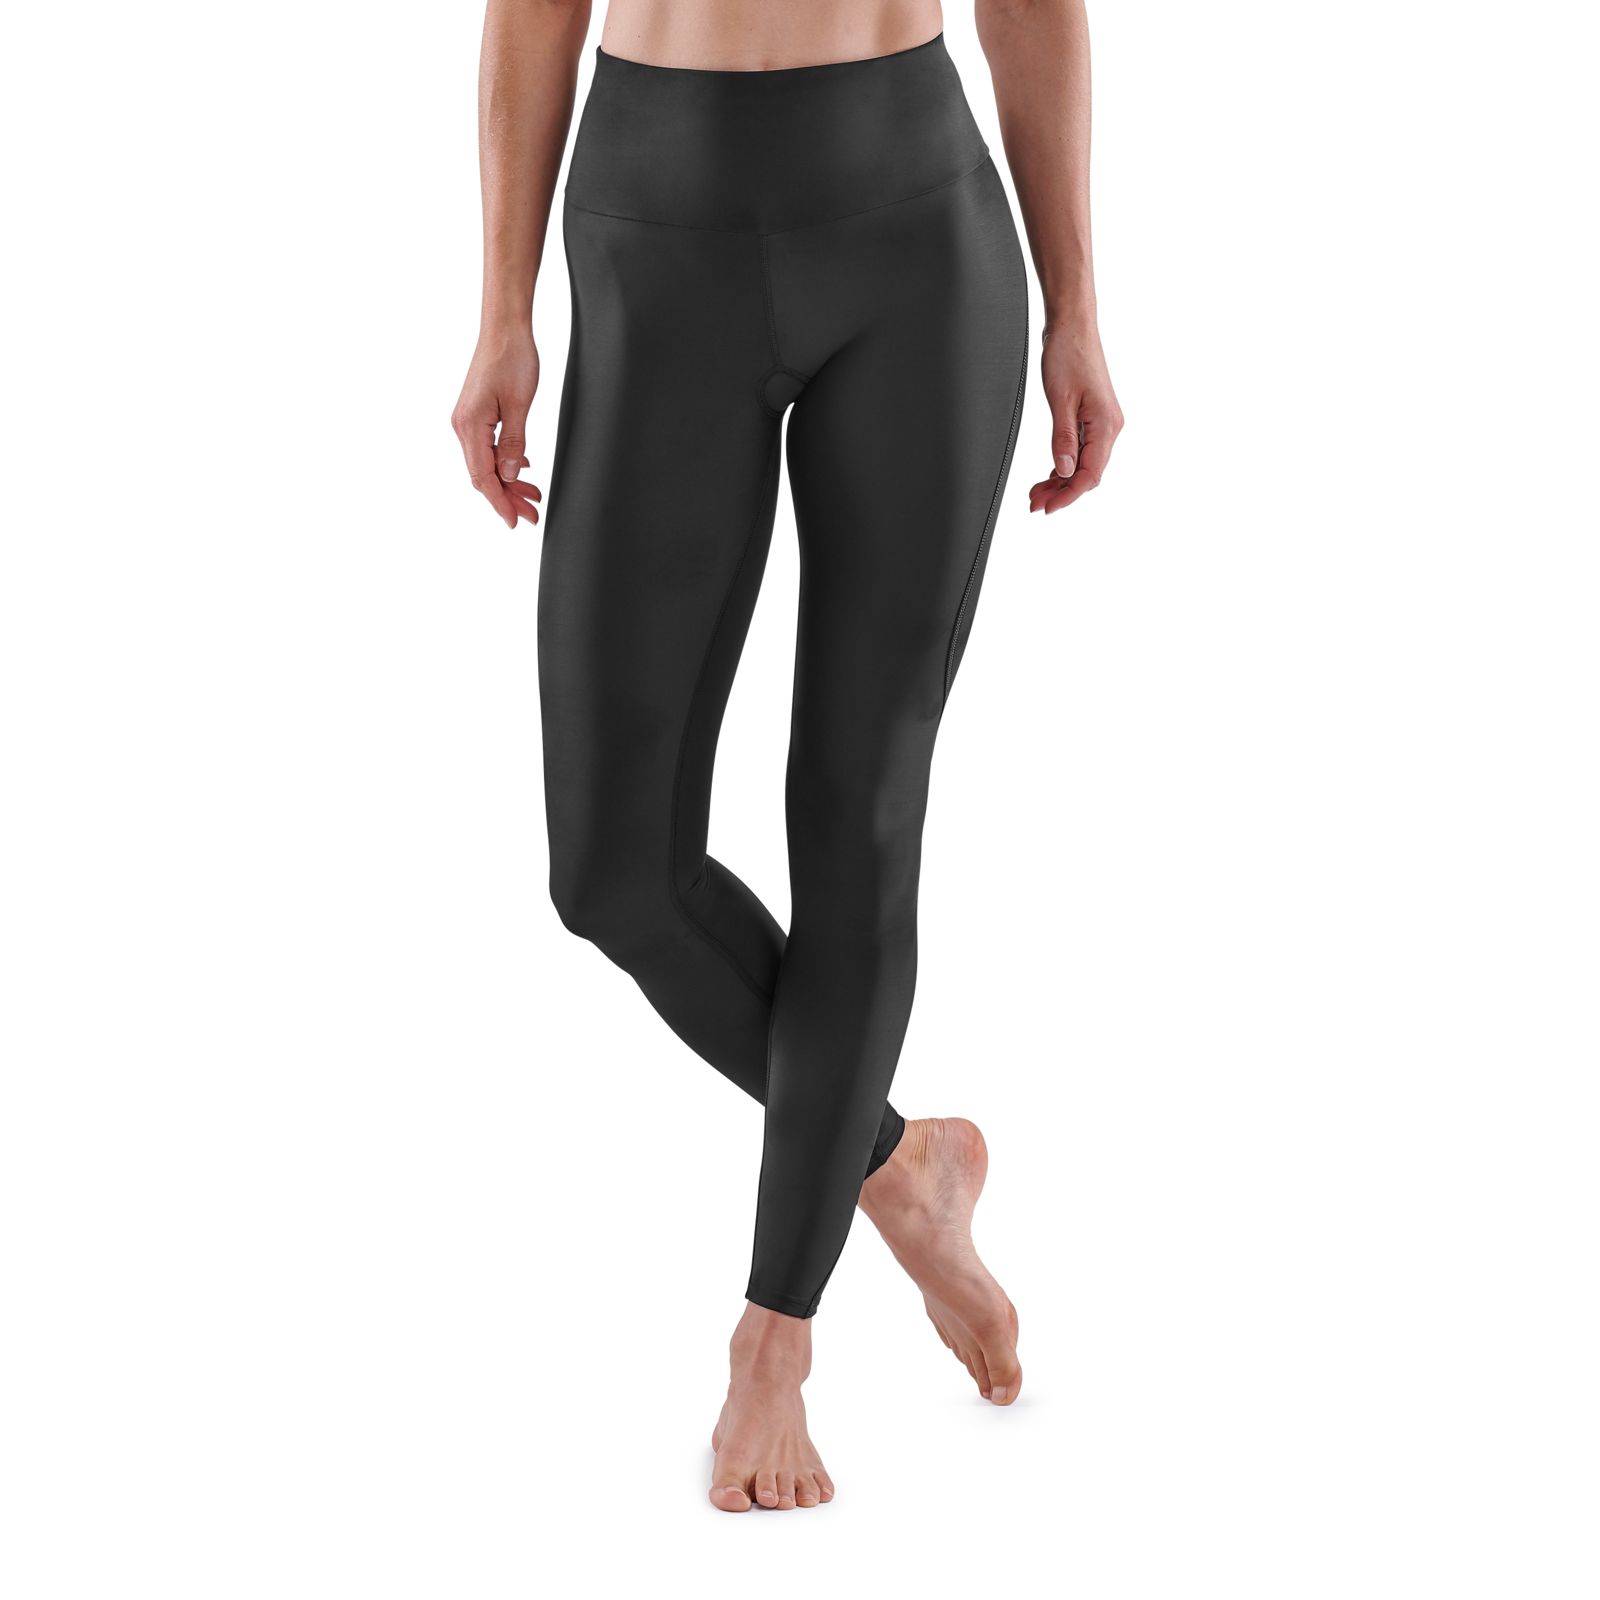 Skins Womens Series 5 Skyscaper Compression Tights Bottoms Pants